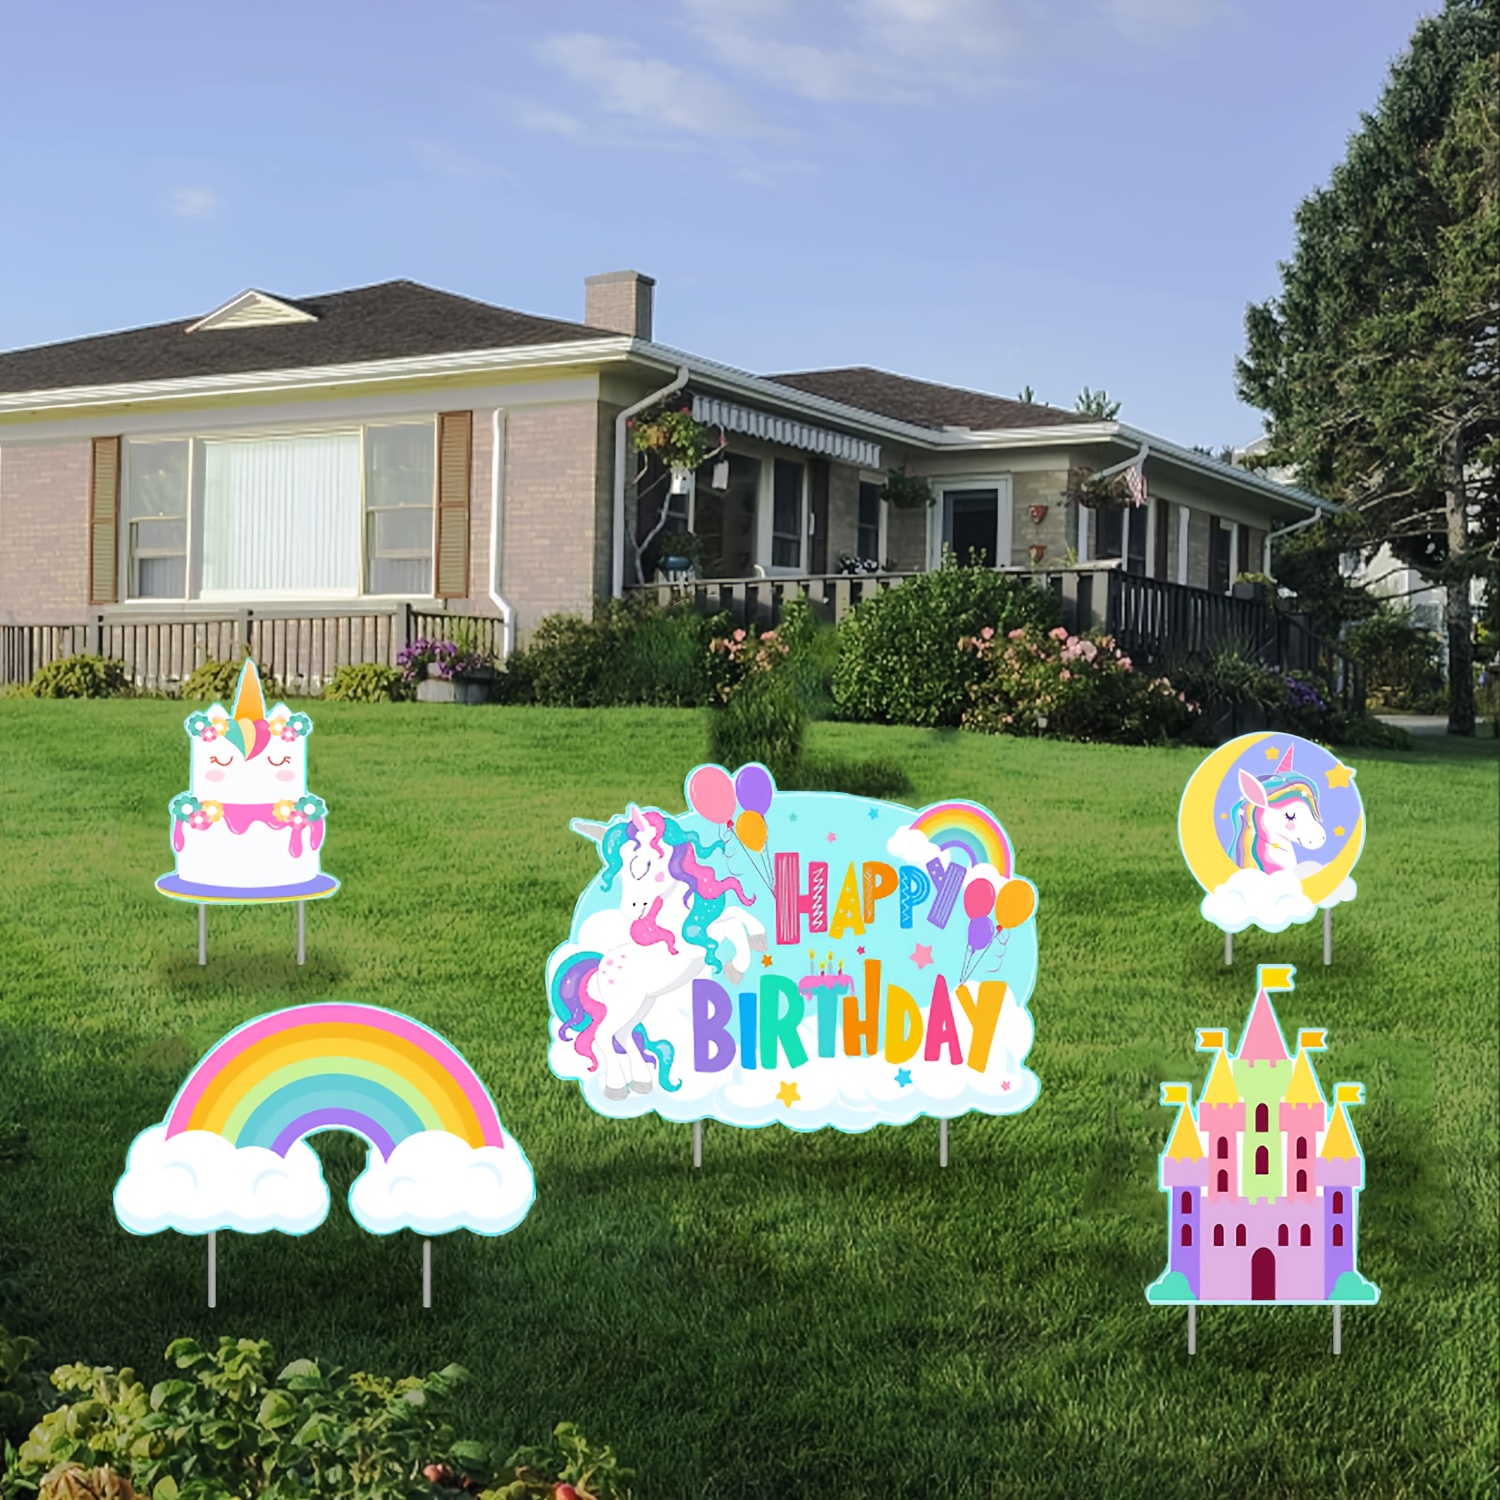 

5-piece Birthday Yard Sign Set - Colorful Outdoor Lawn Decorations With Stakes For Girls' Party Transform Your Yard Into A Fantasy Land